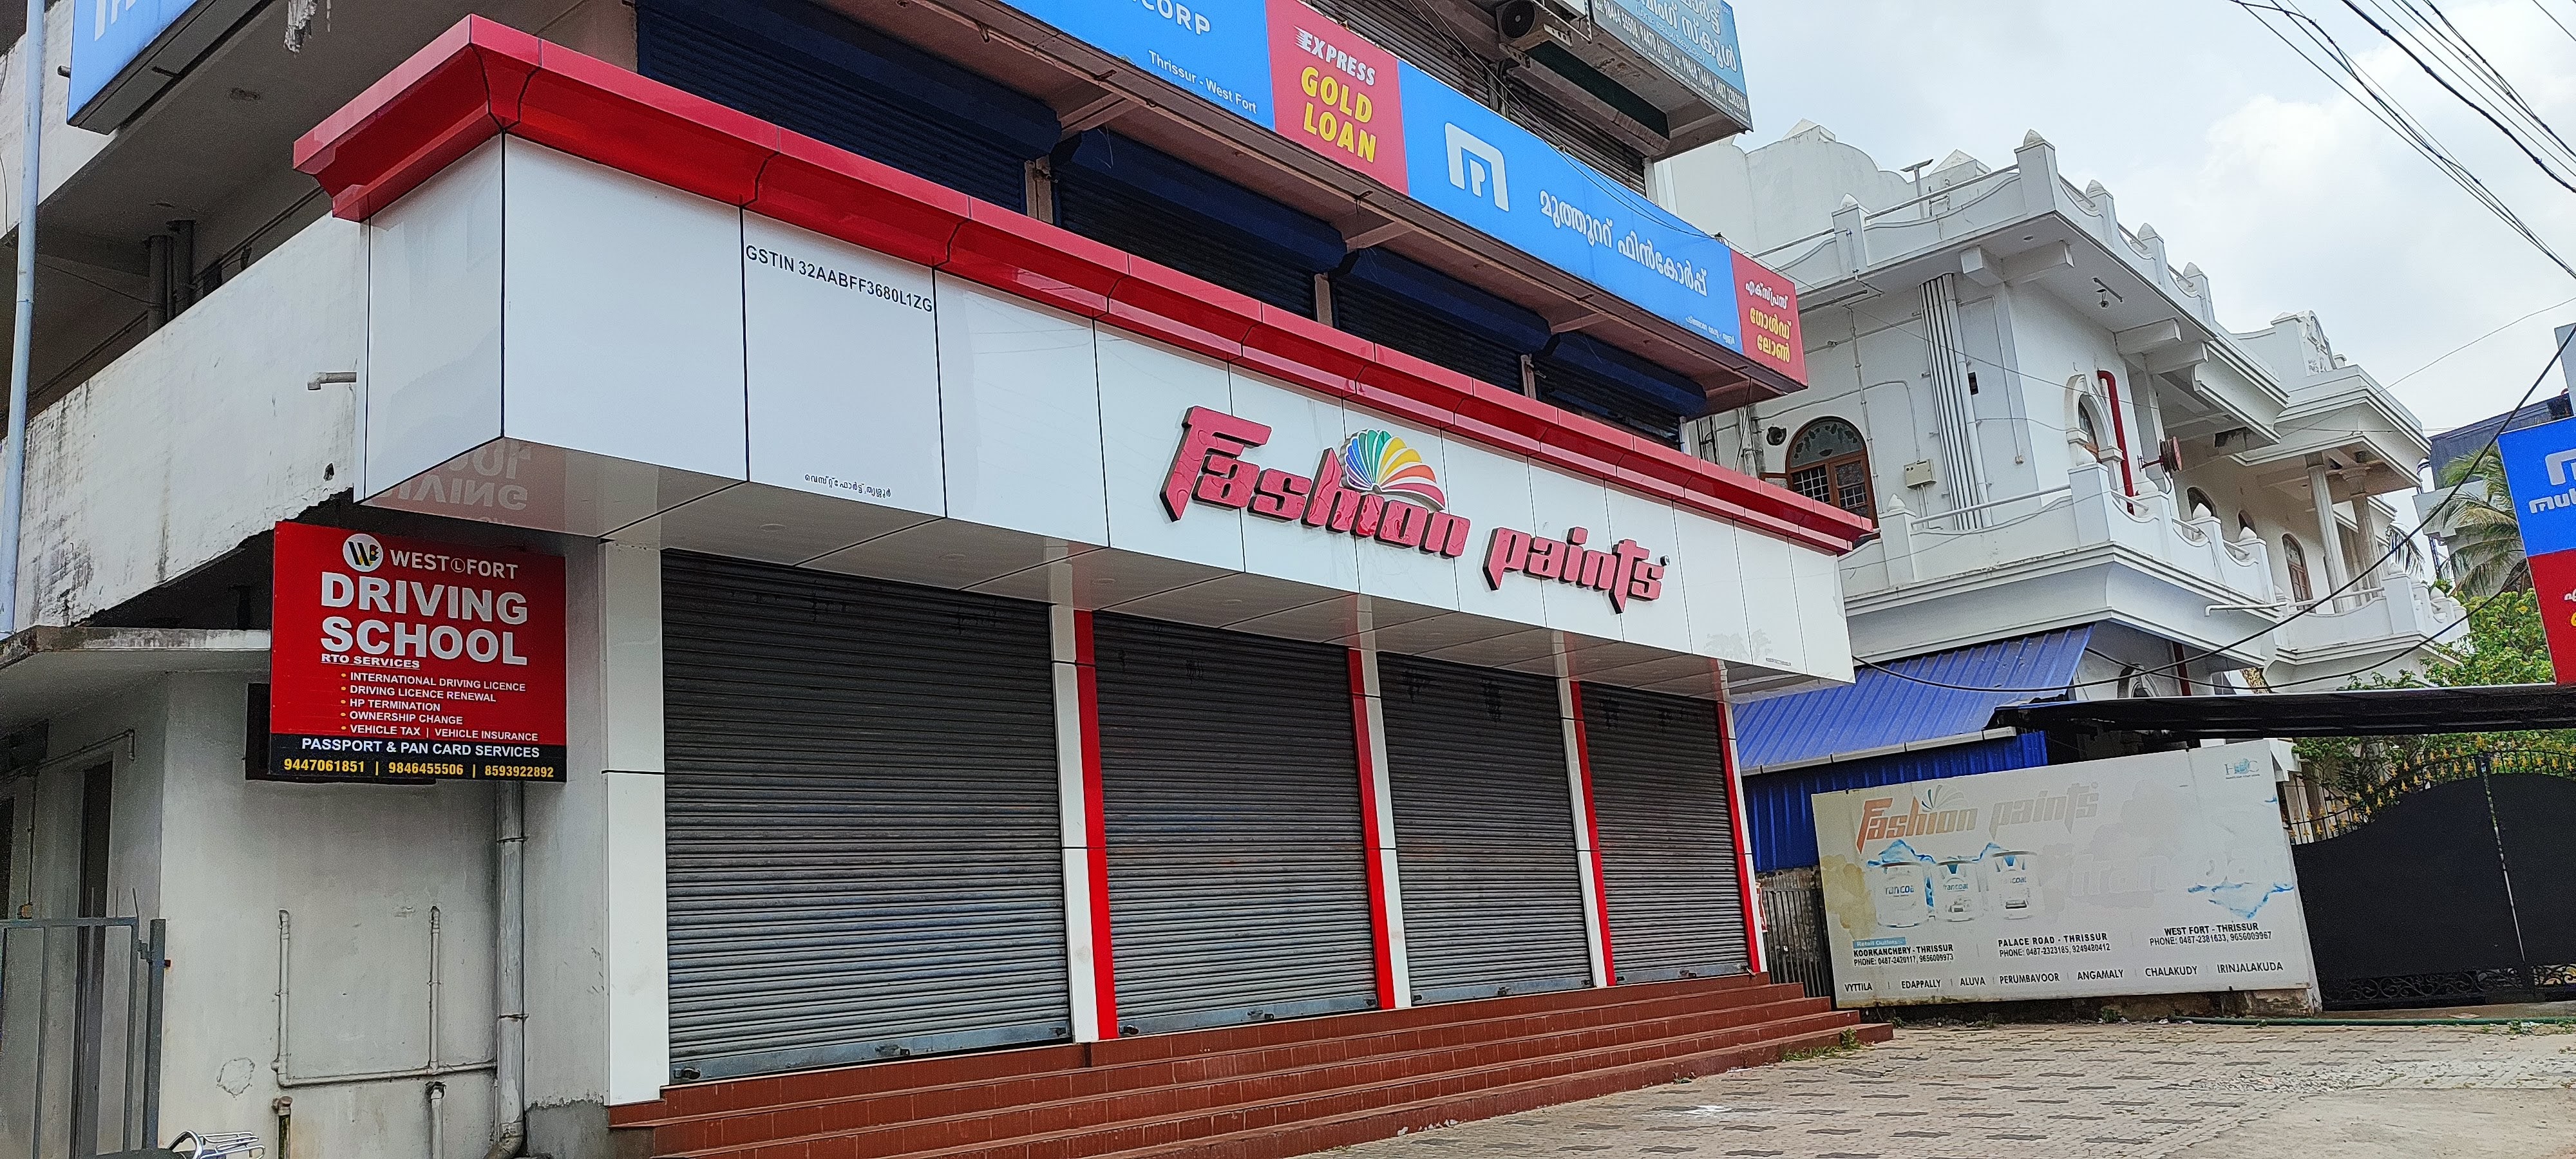 Photos and Videos of Muthoot Fincorp Gold Loan in Poothole, Thrissur